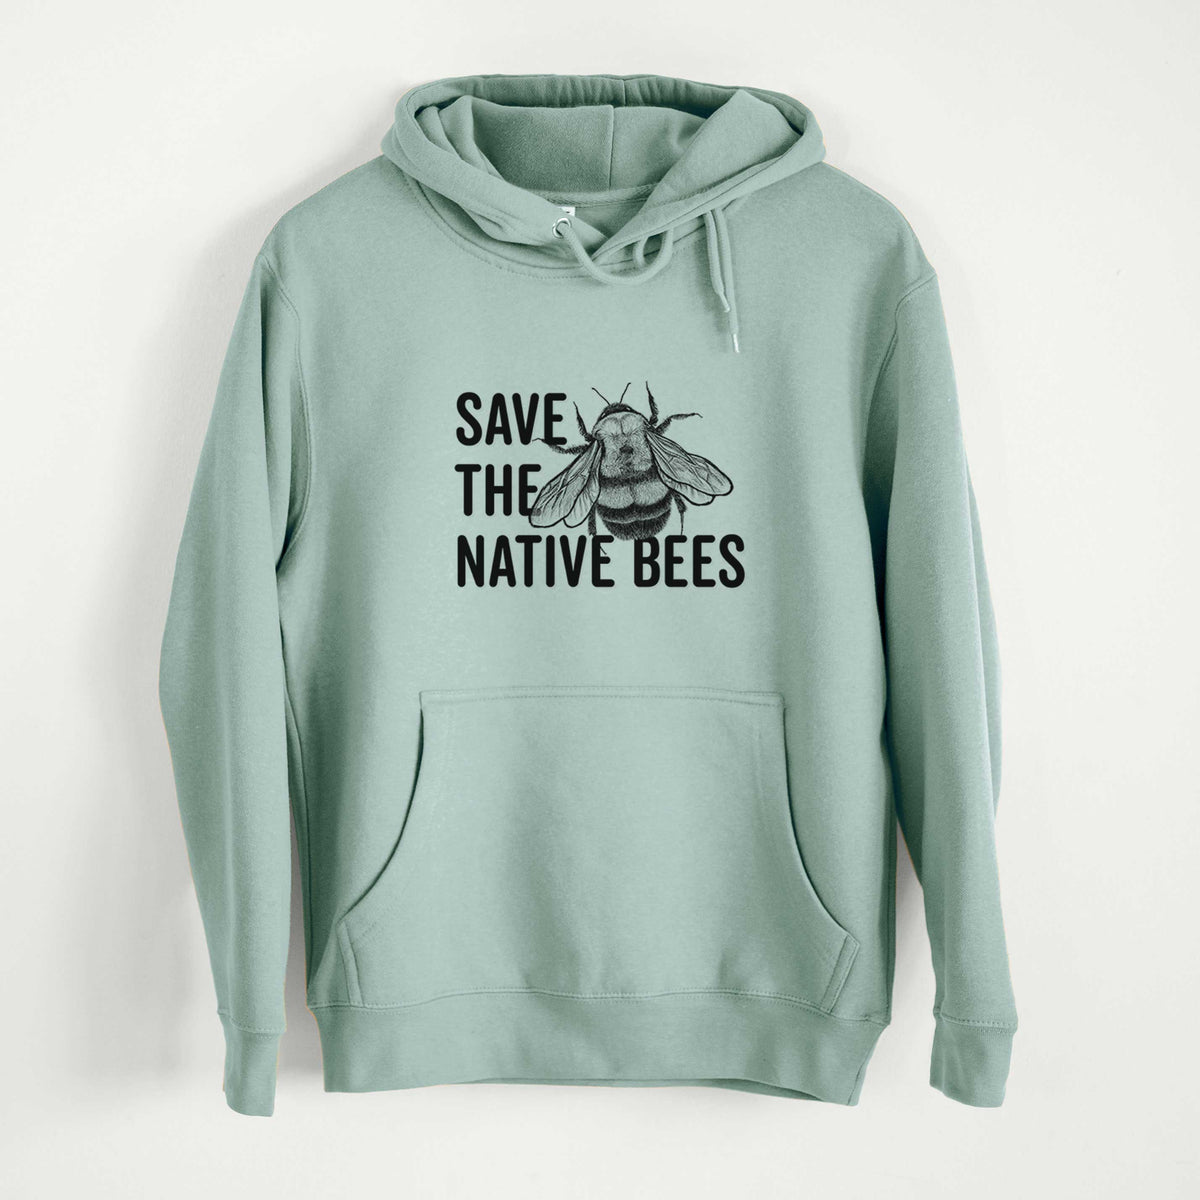 Save the Native Bees  - Mid-Weight Unisex Premium Blend Hoodie